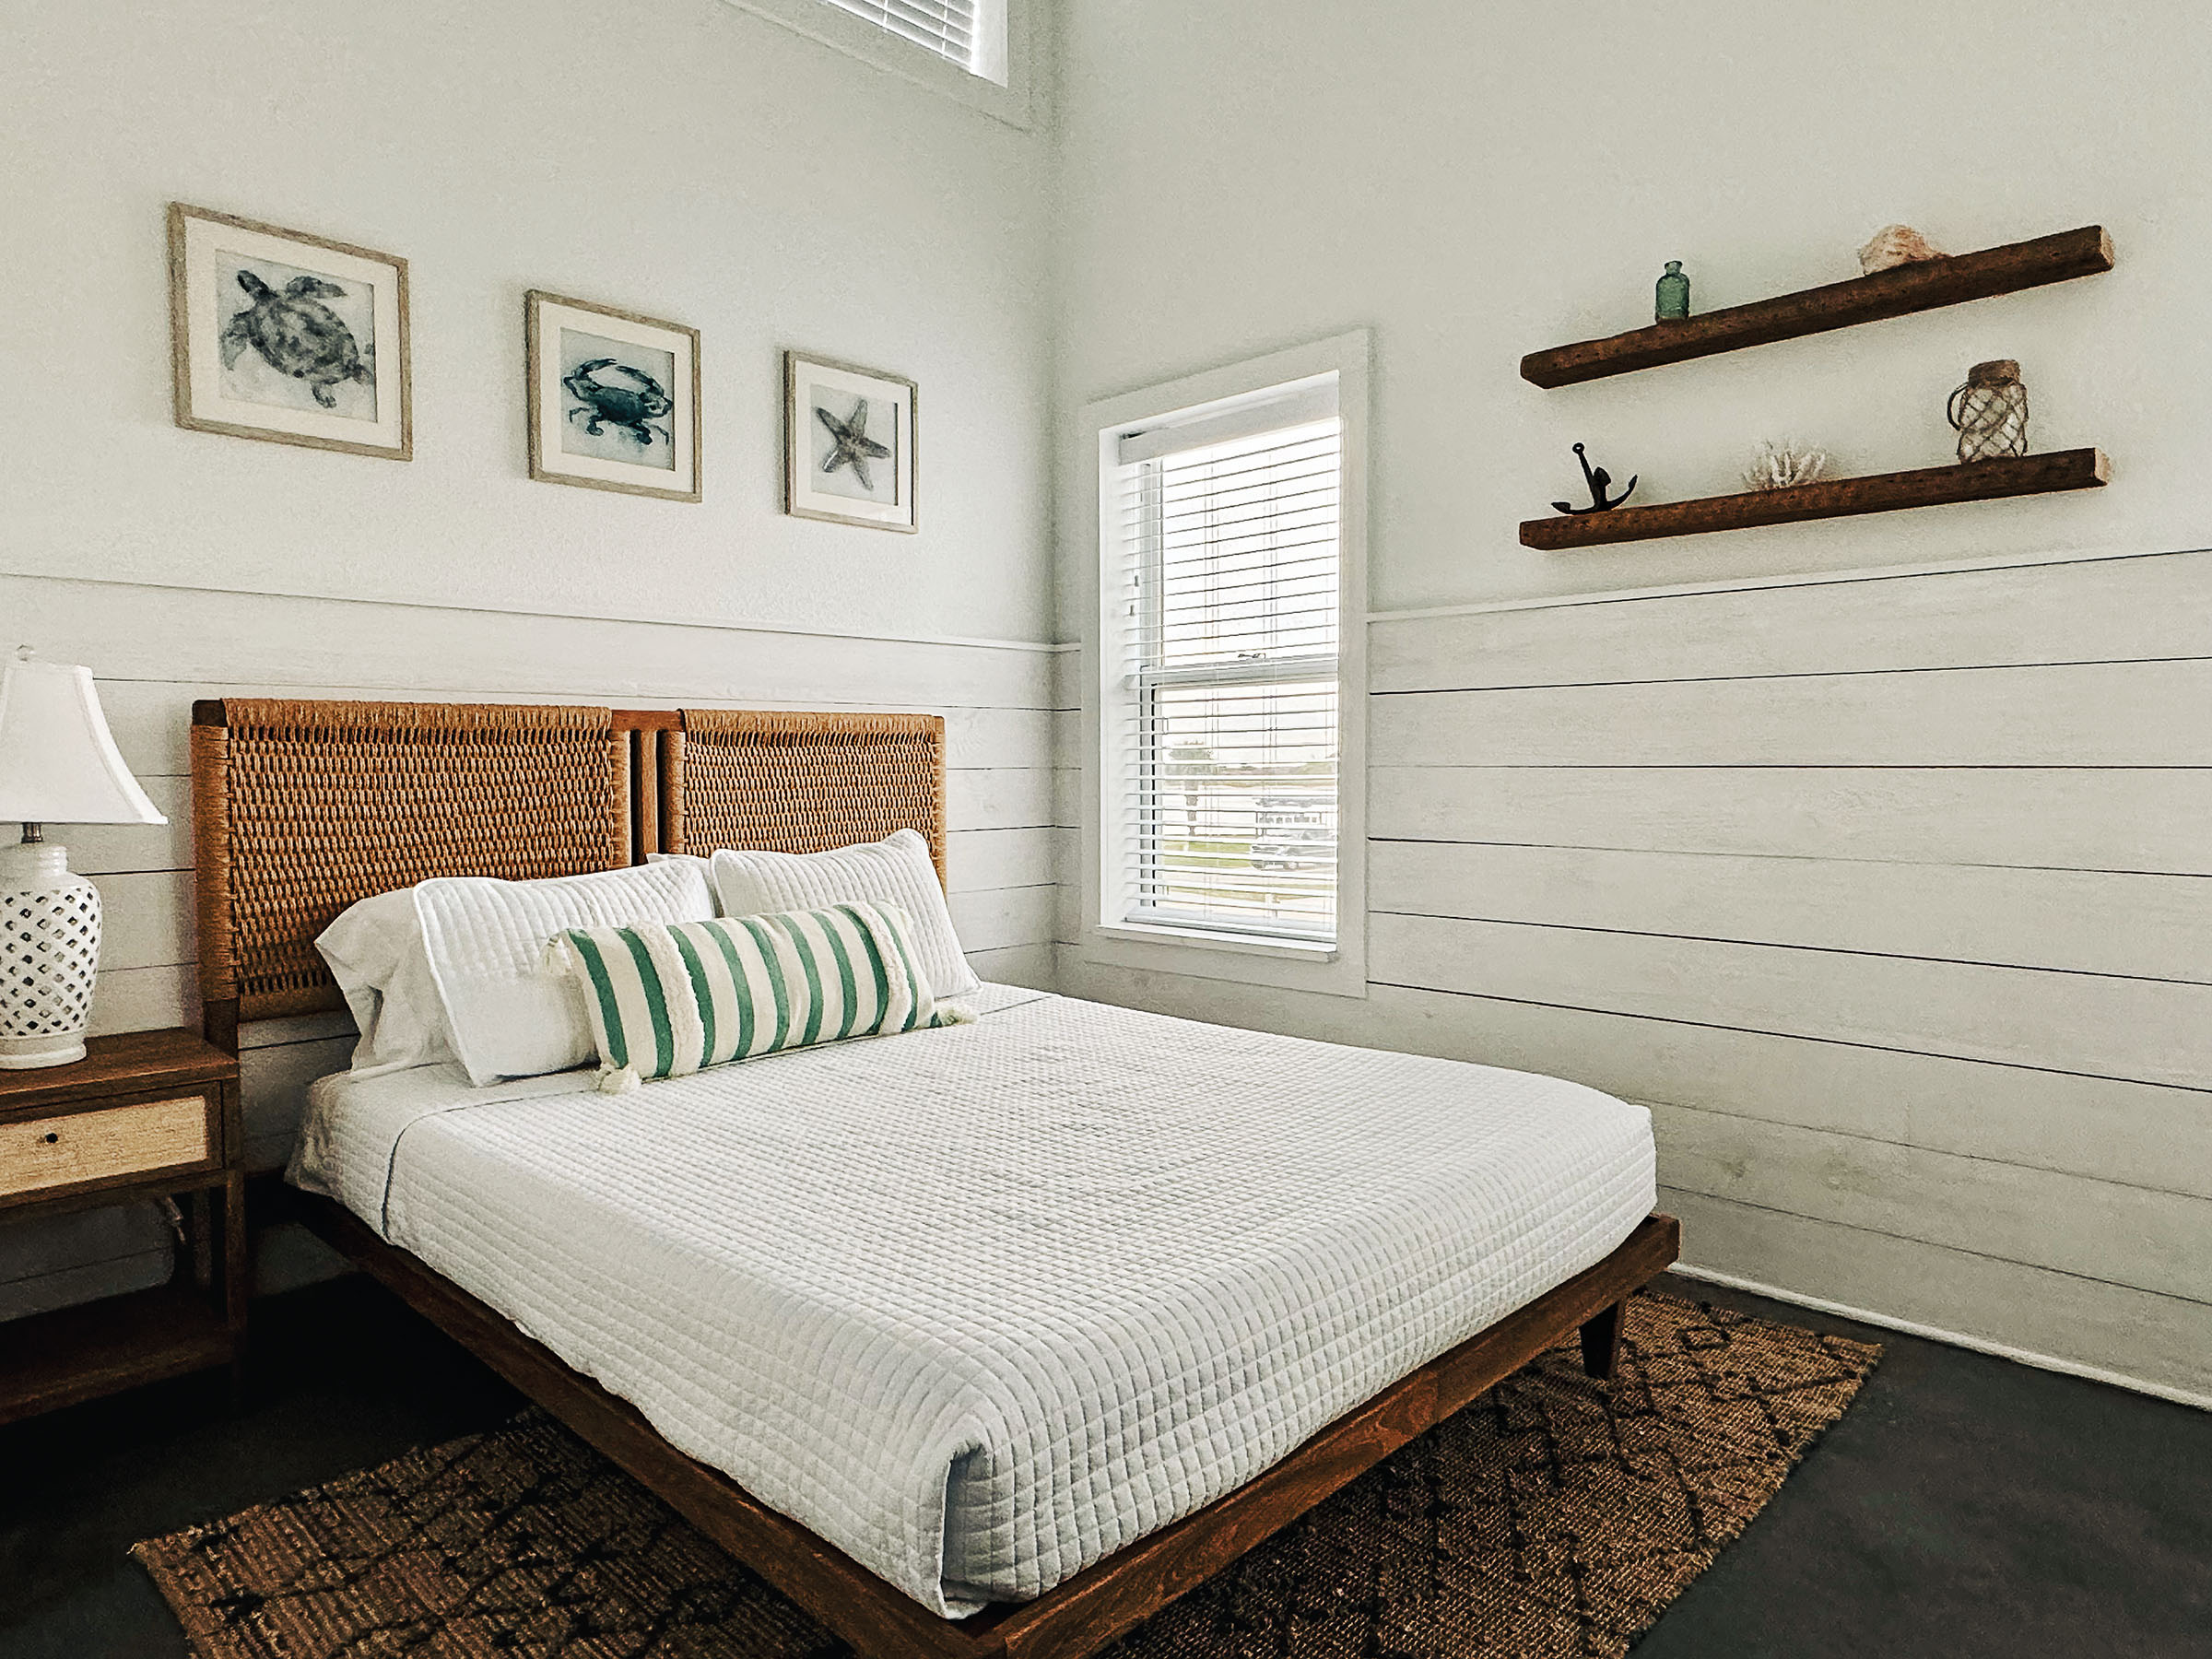 A white comforter on a wooden bedframe underneath wood paneling